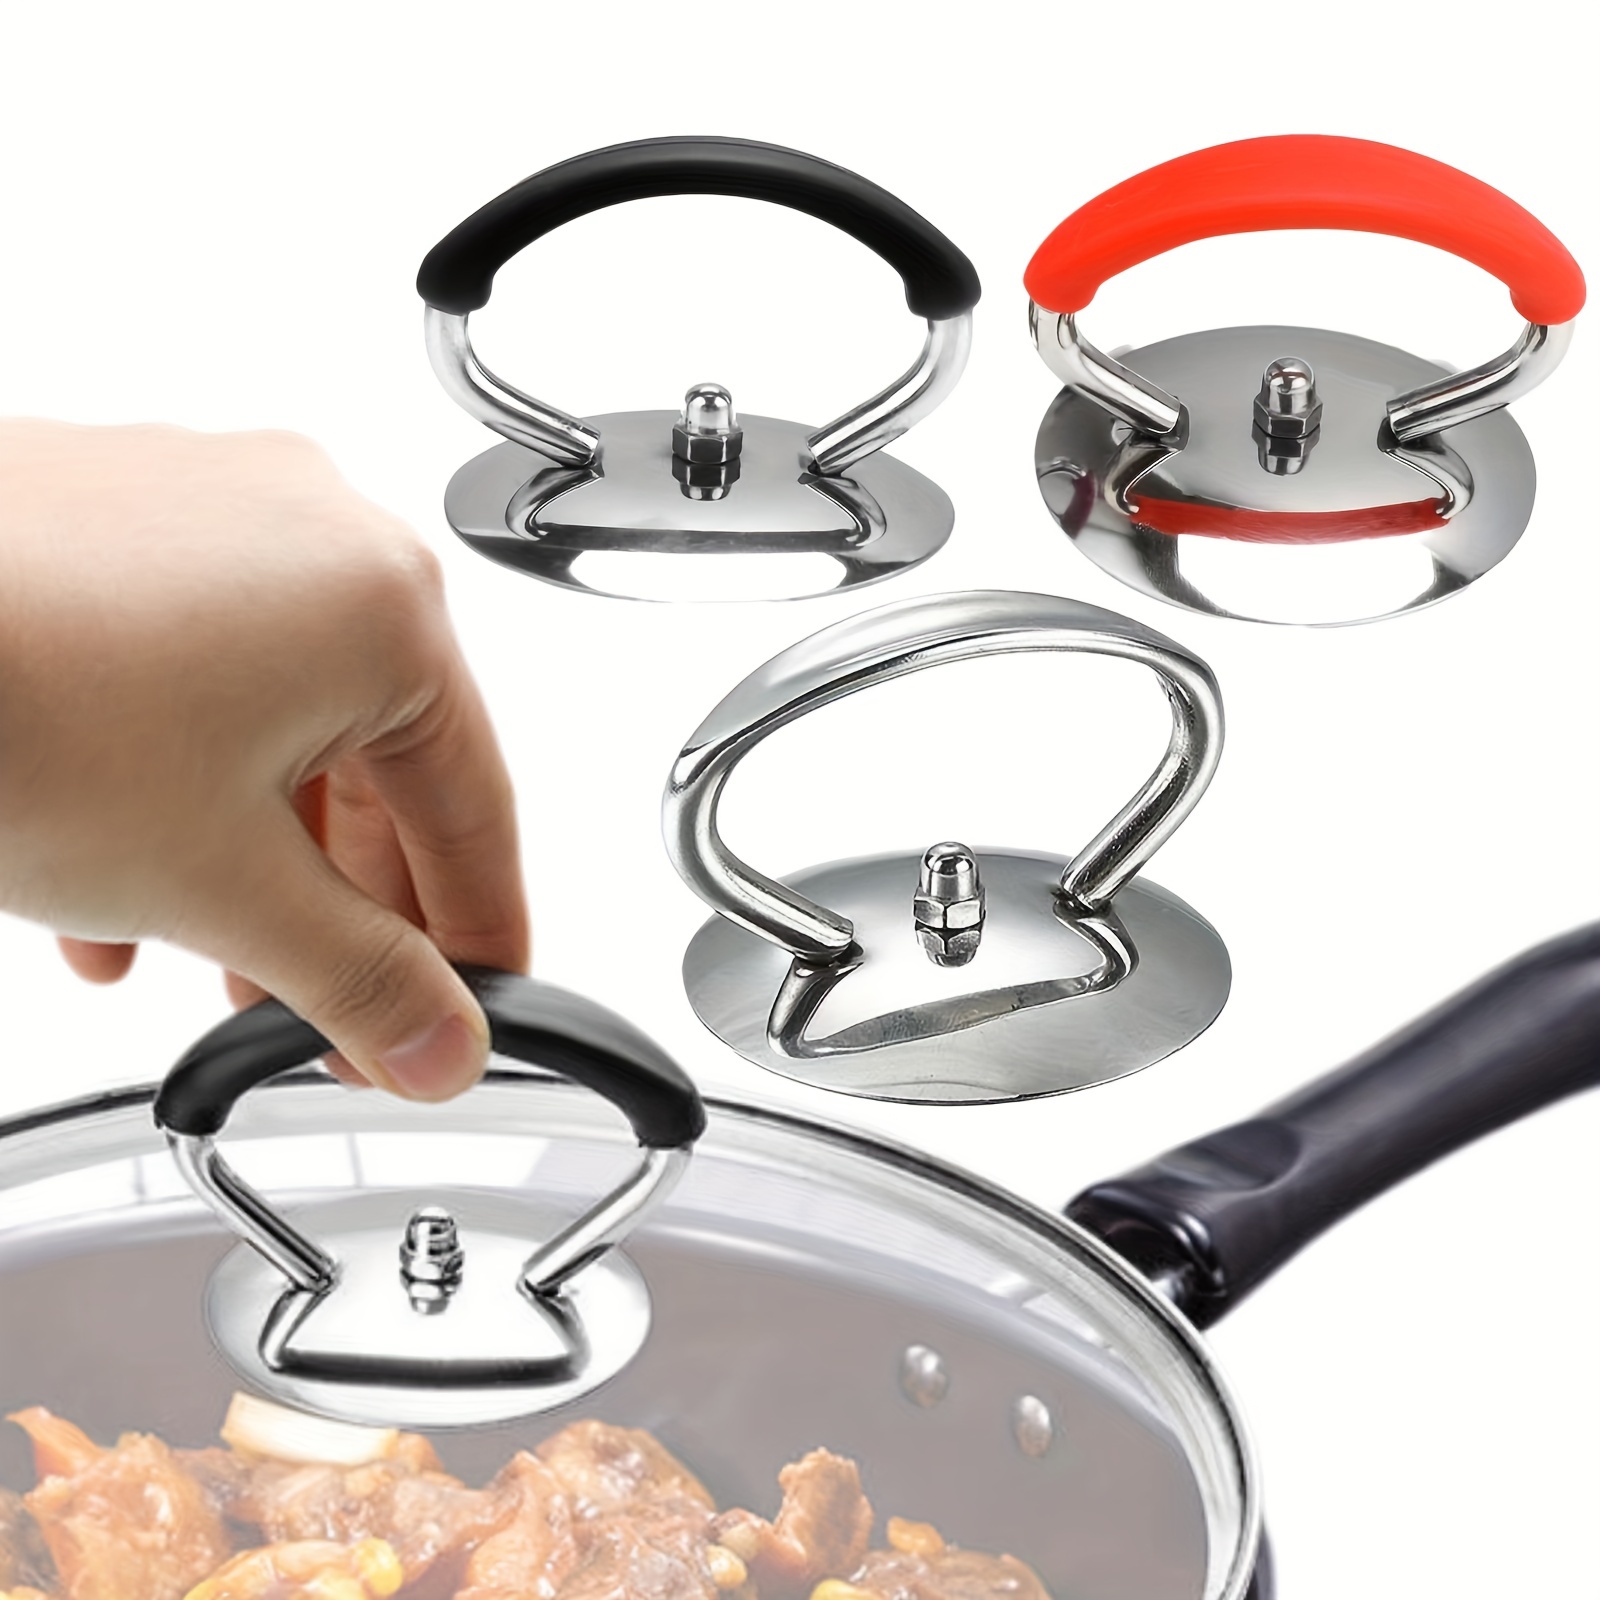 Upgrade Your Cooking with this 1pc Silicone Hot Skillet Handle